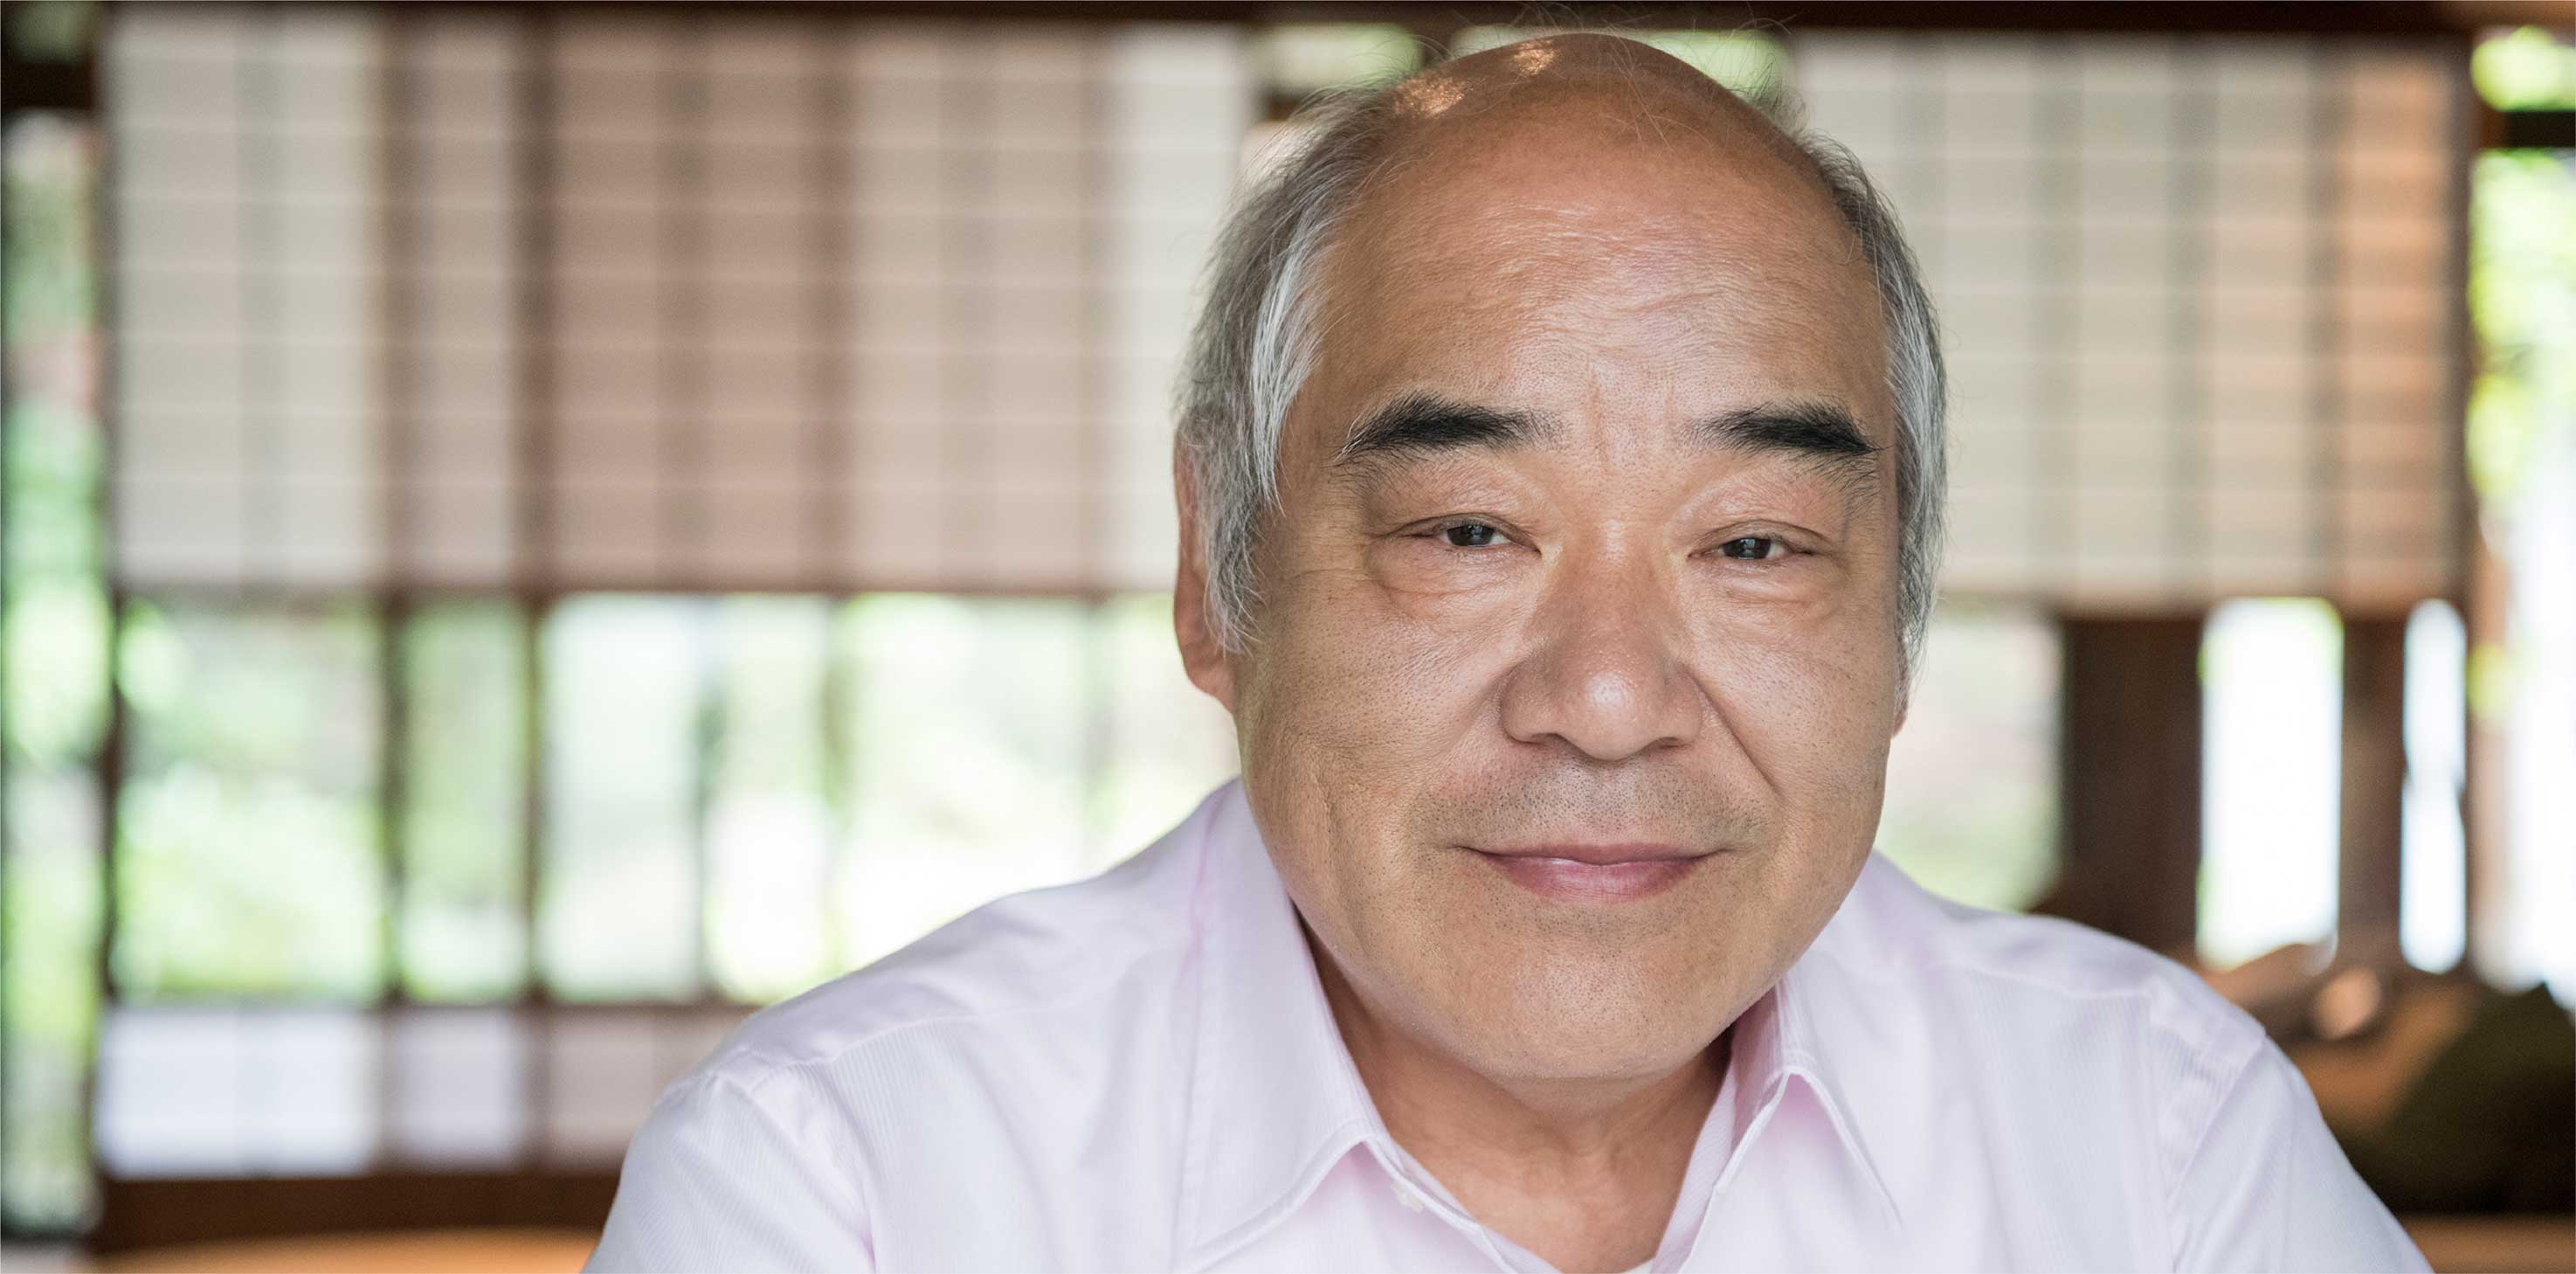 A headshot of a grey-haired man of Asian descent, smiling softly at the camera.